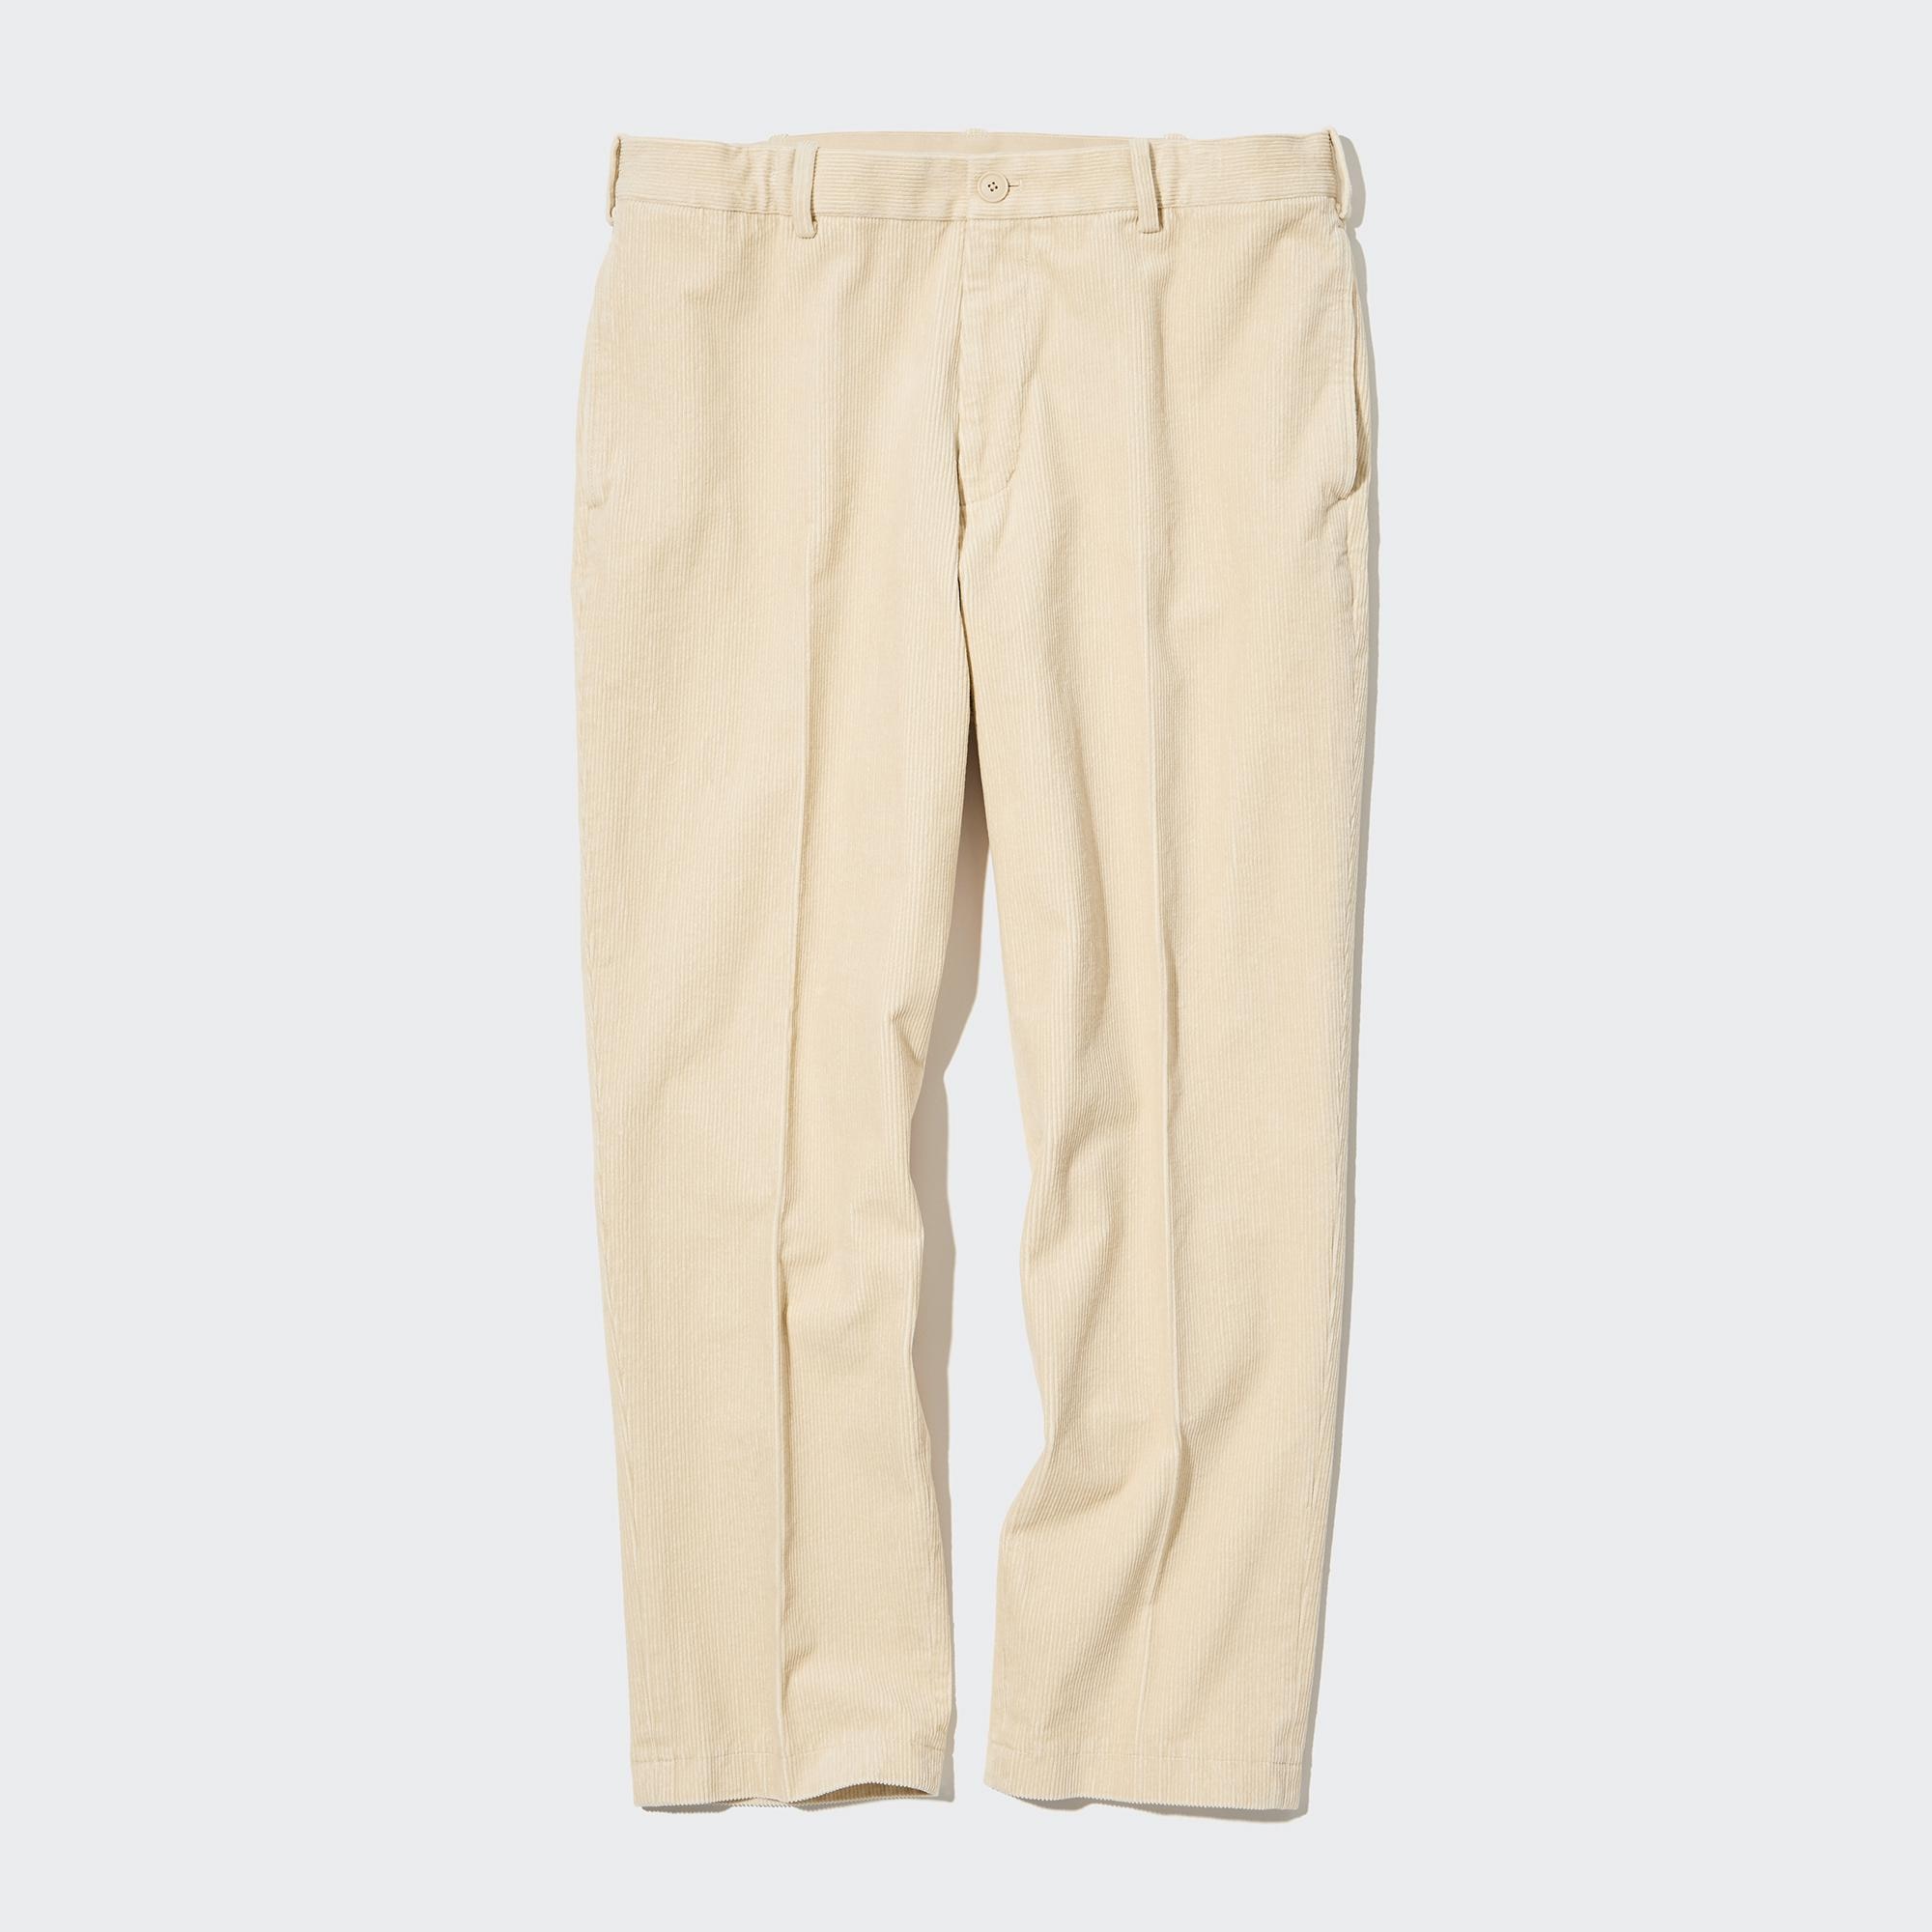 WOMENS DENIM JERSEY TAPERED TROUSERS  UNIQLO IN